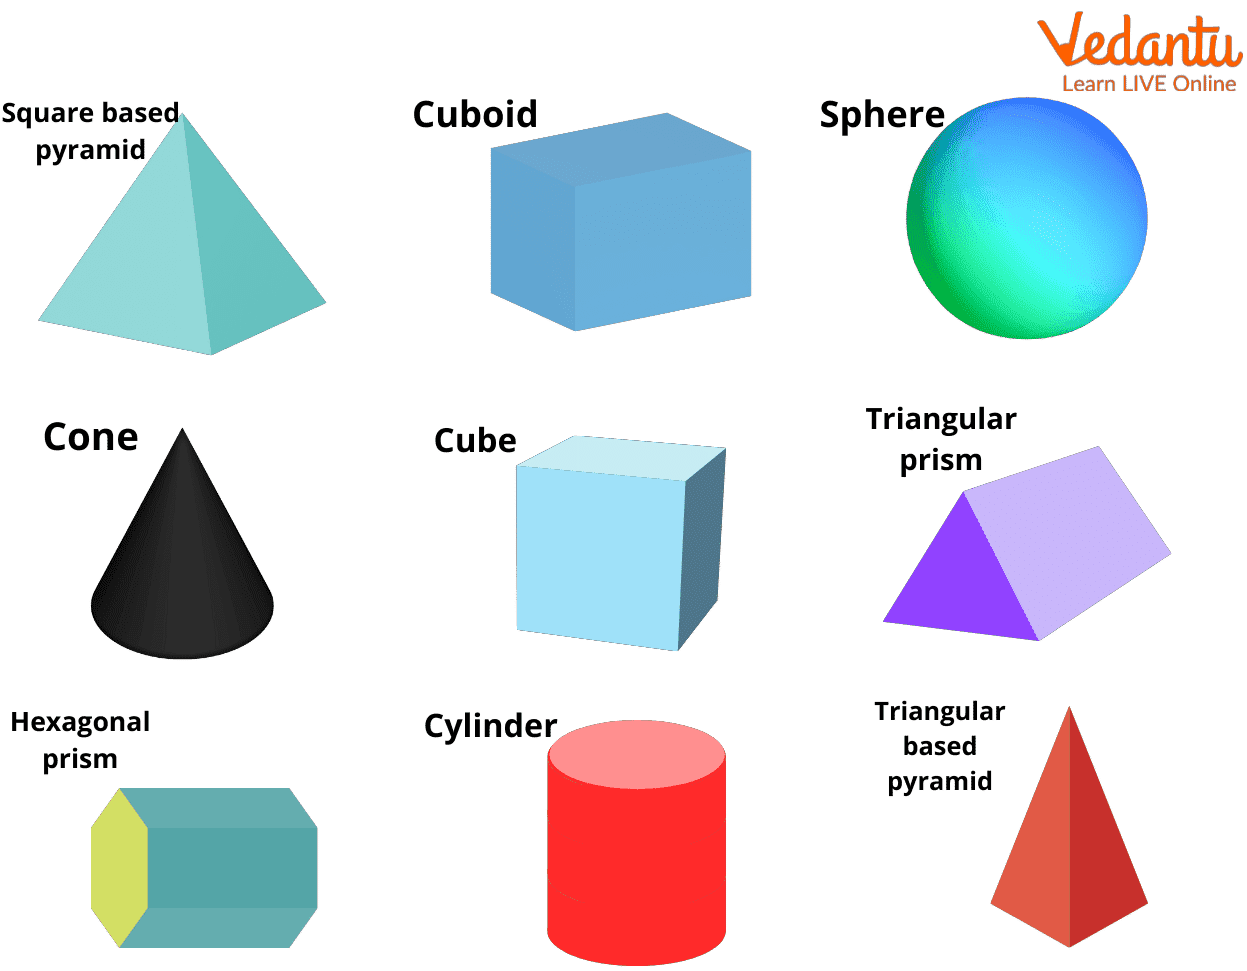 Cone-shaped png images